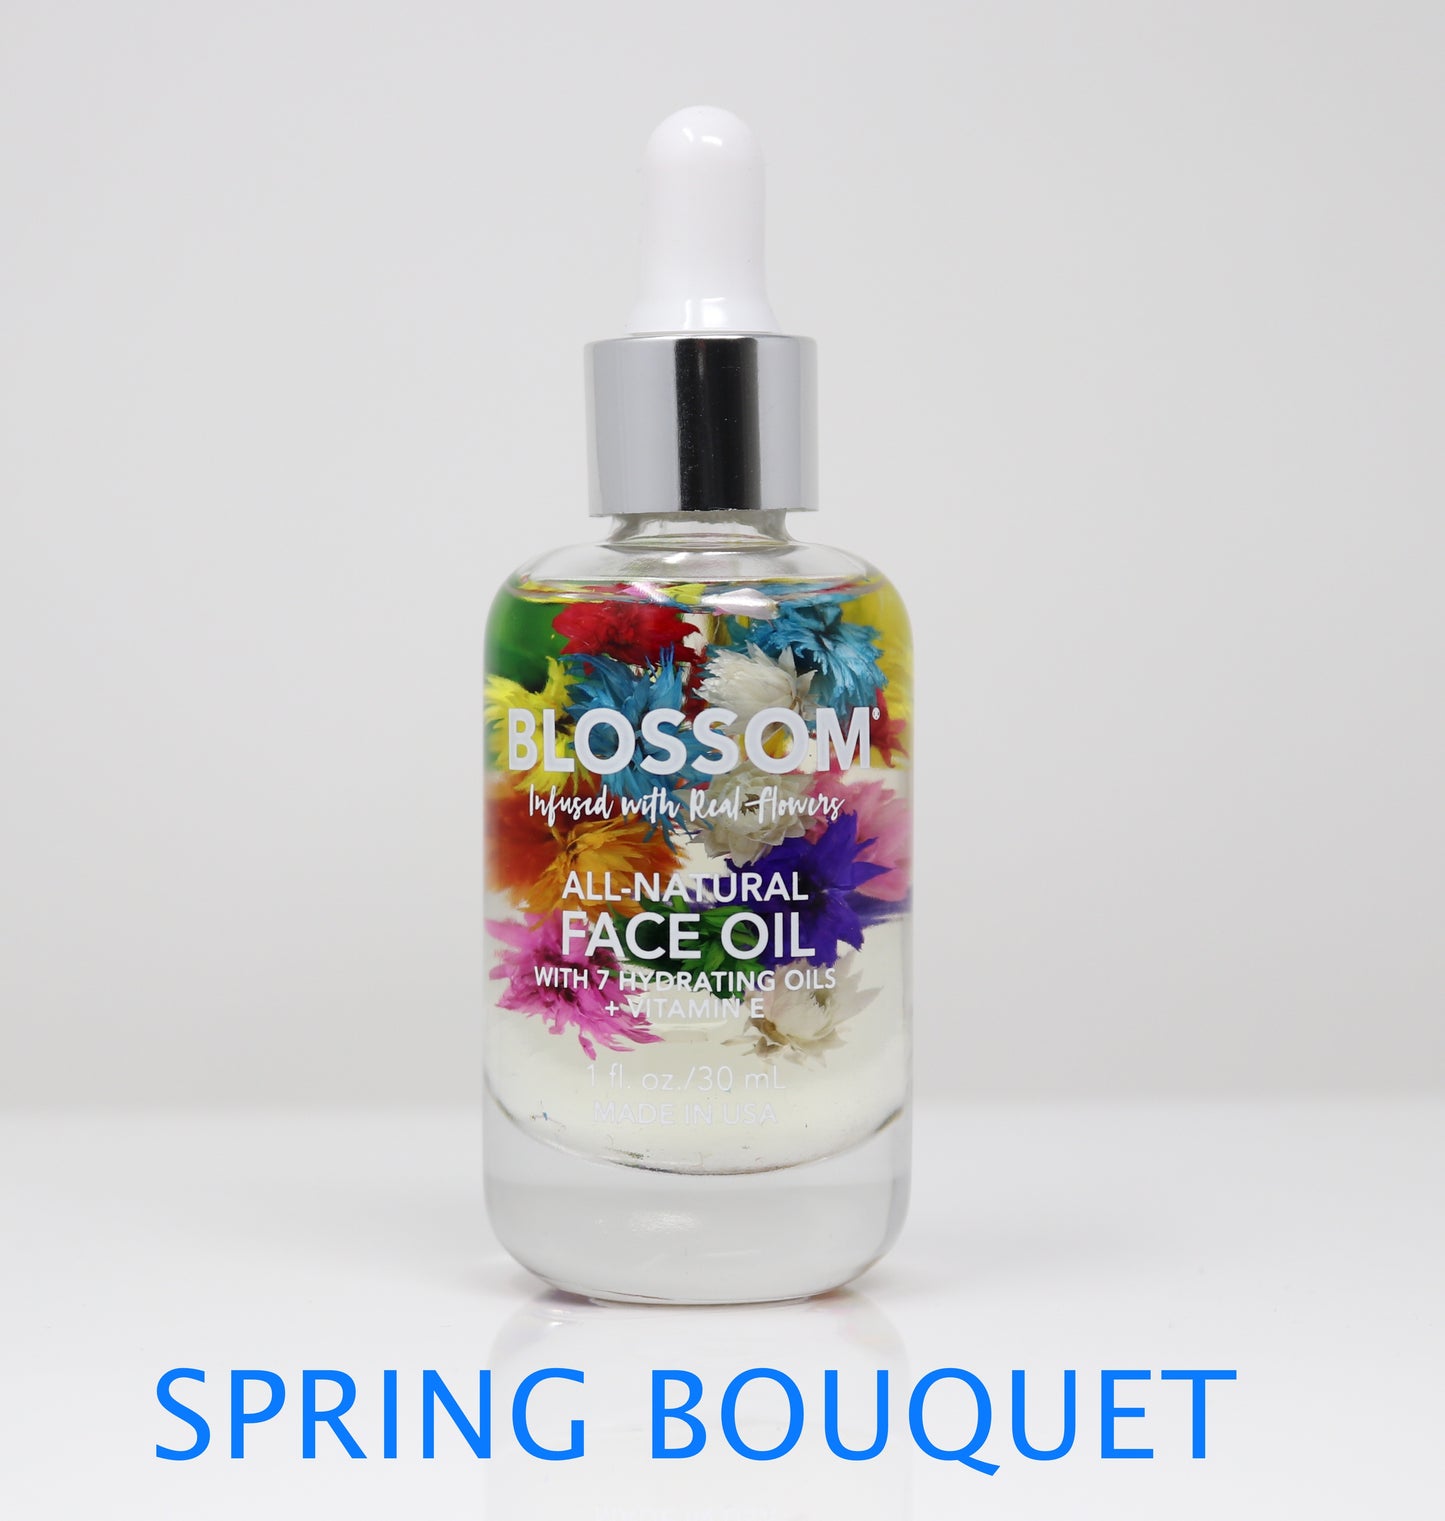 Blossom 100% All-Natural & Hydrating Face Oil 9 Essential Plant & Flower Oils 1 Oz. 1 Pc.